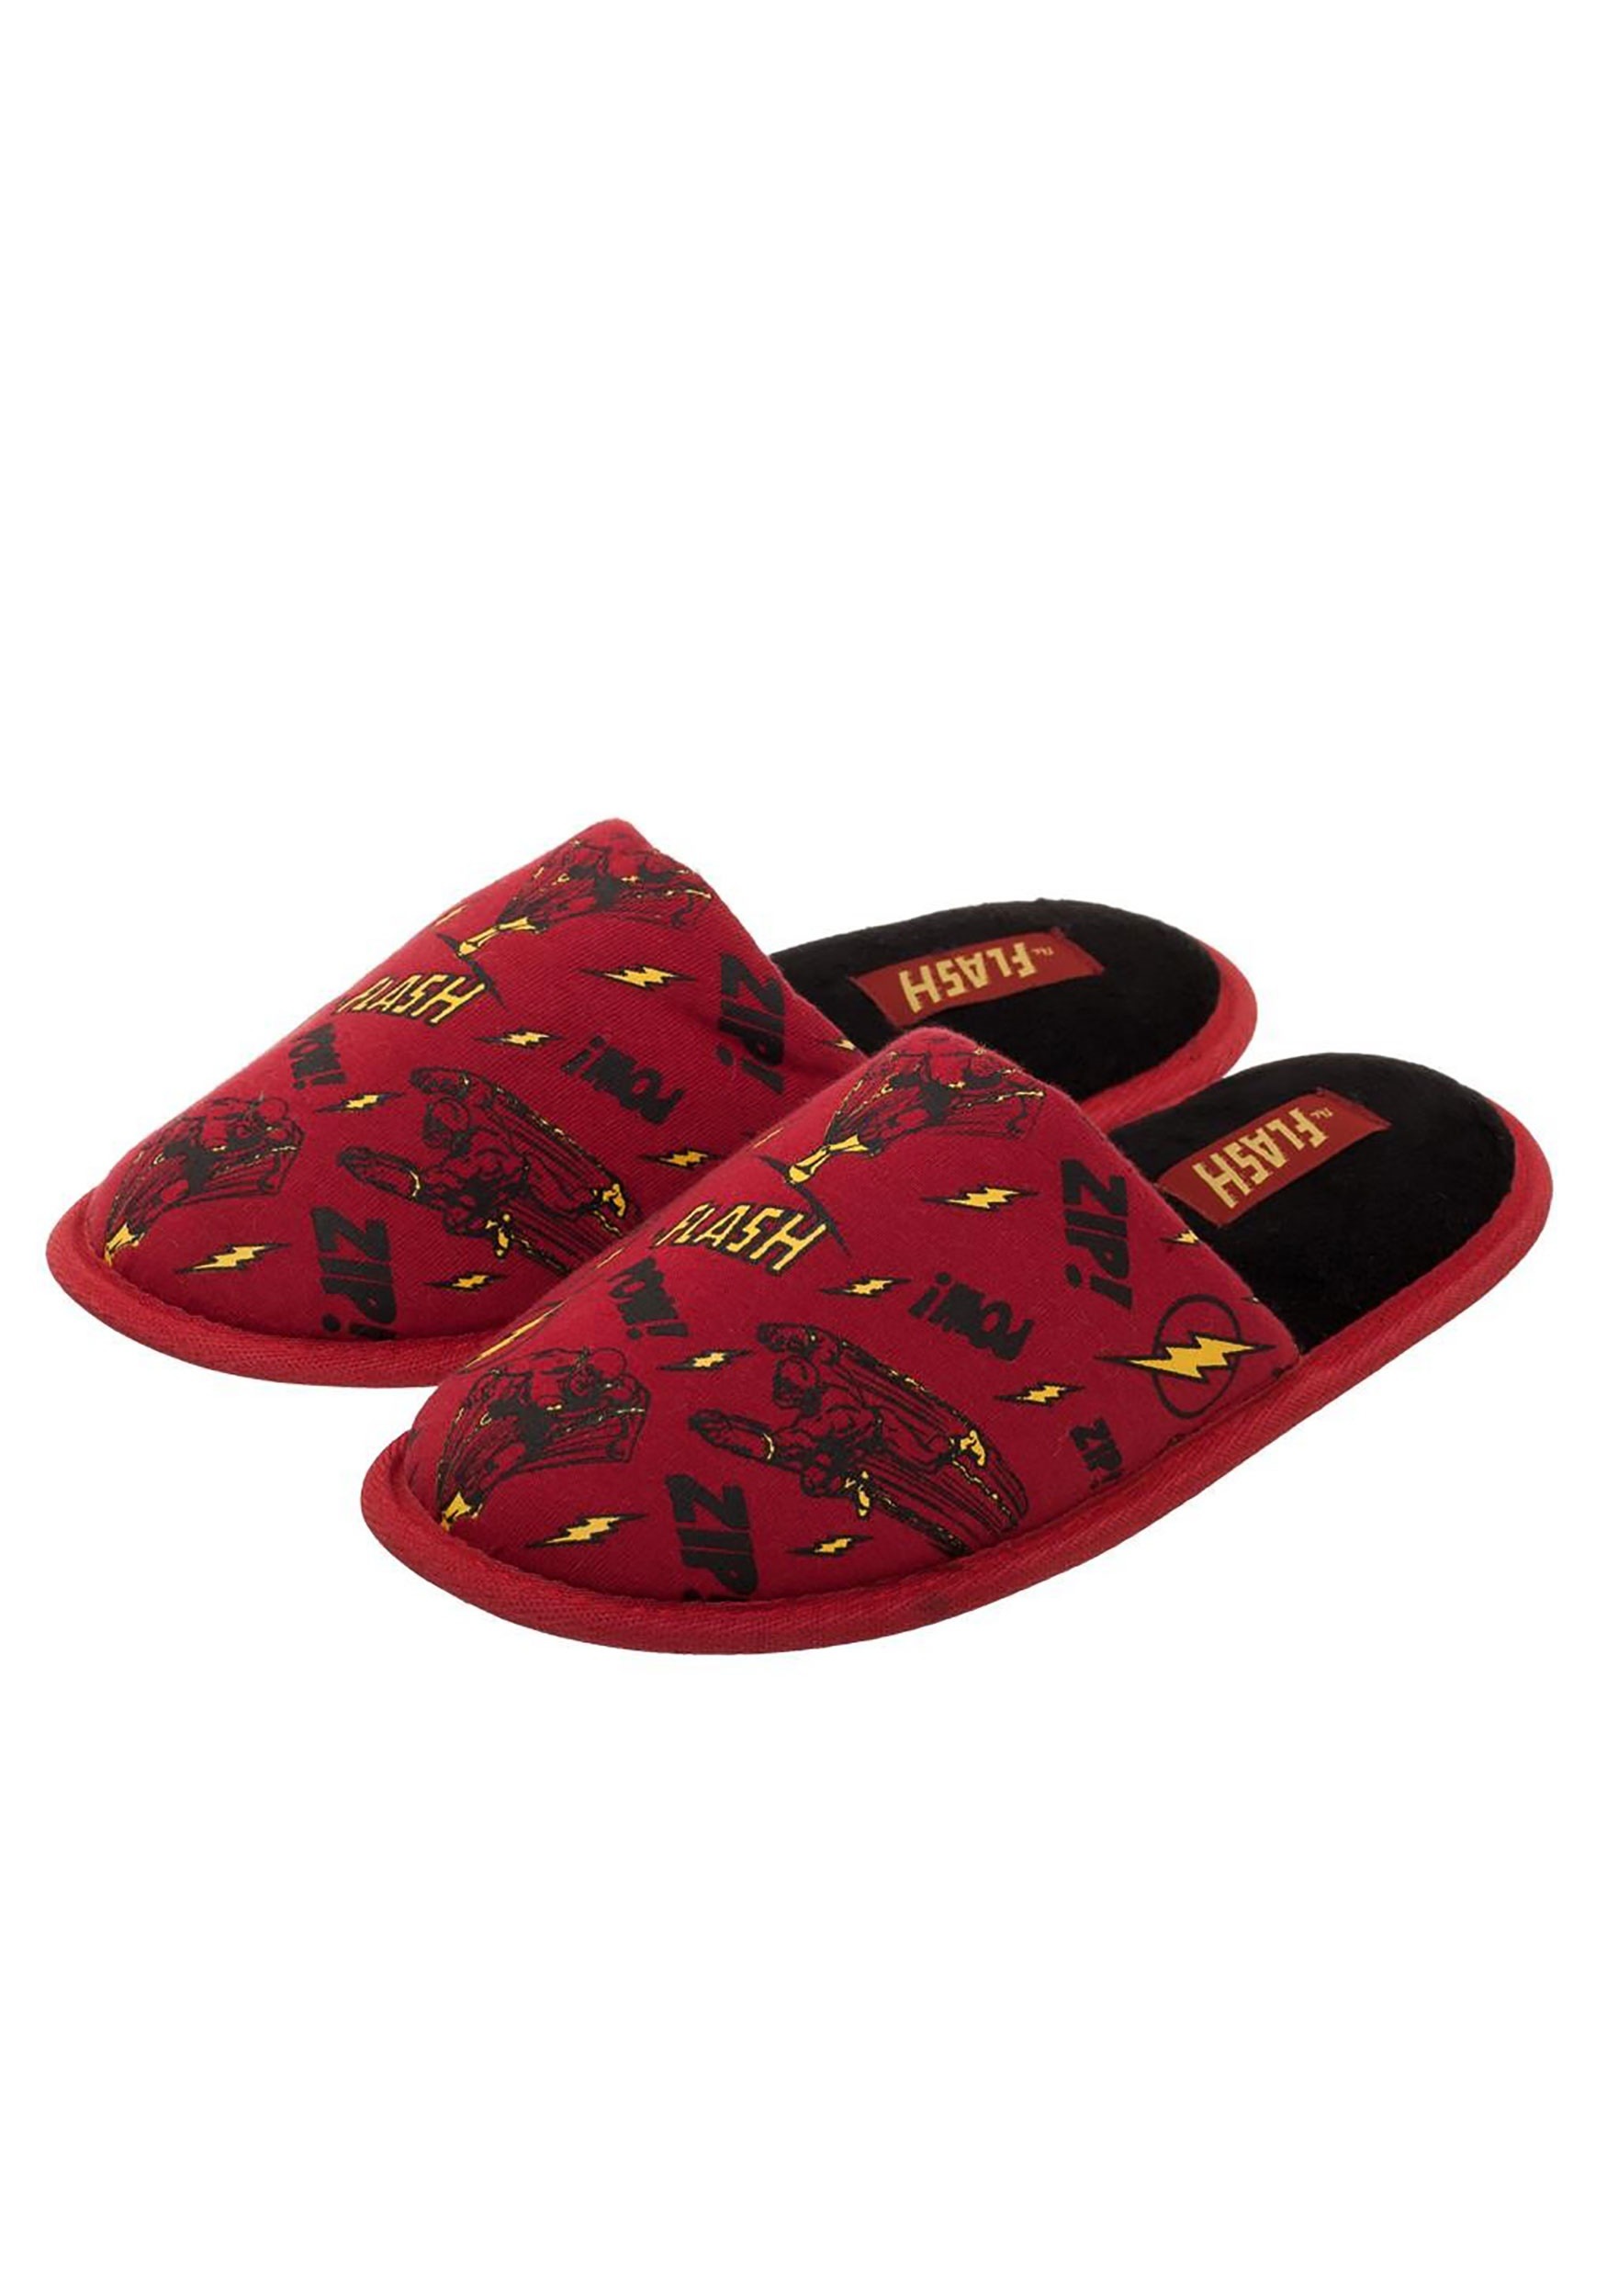 spiderman slippers for adults